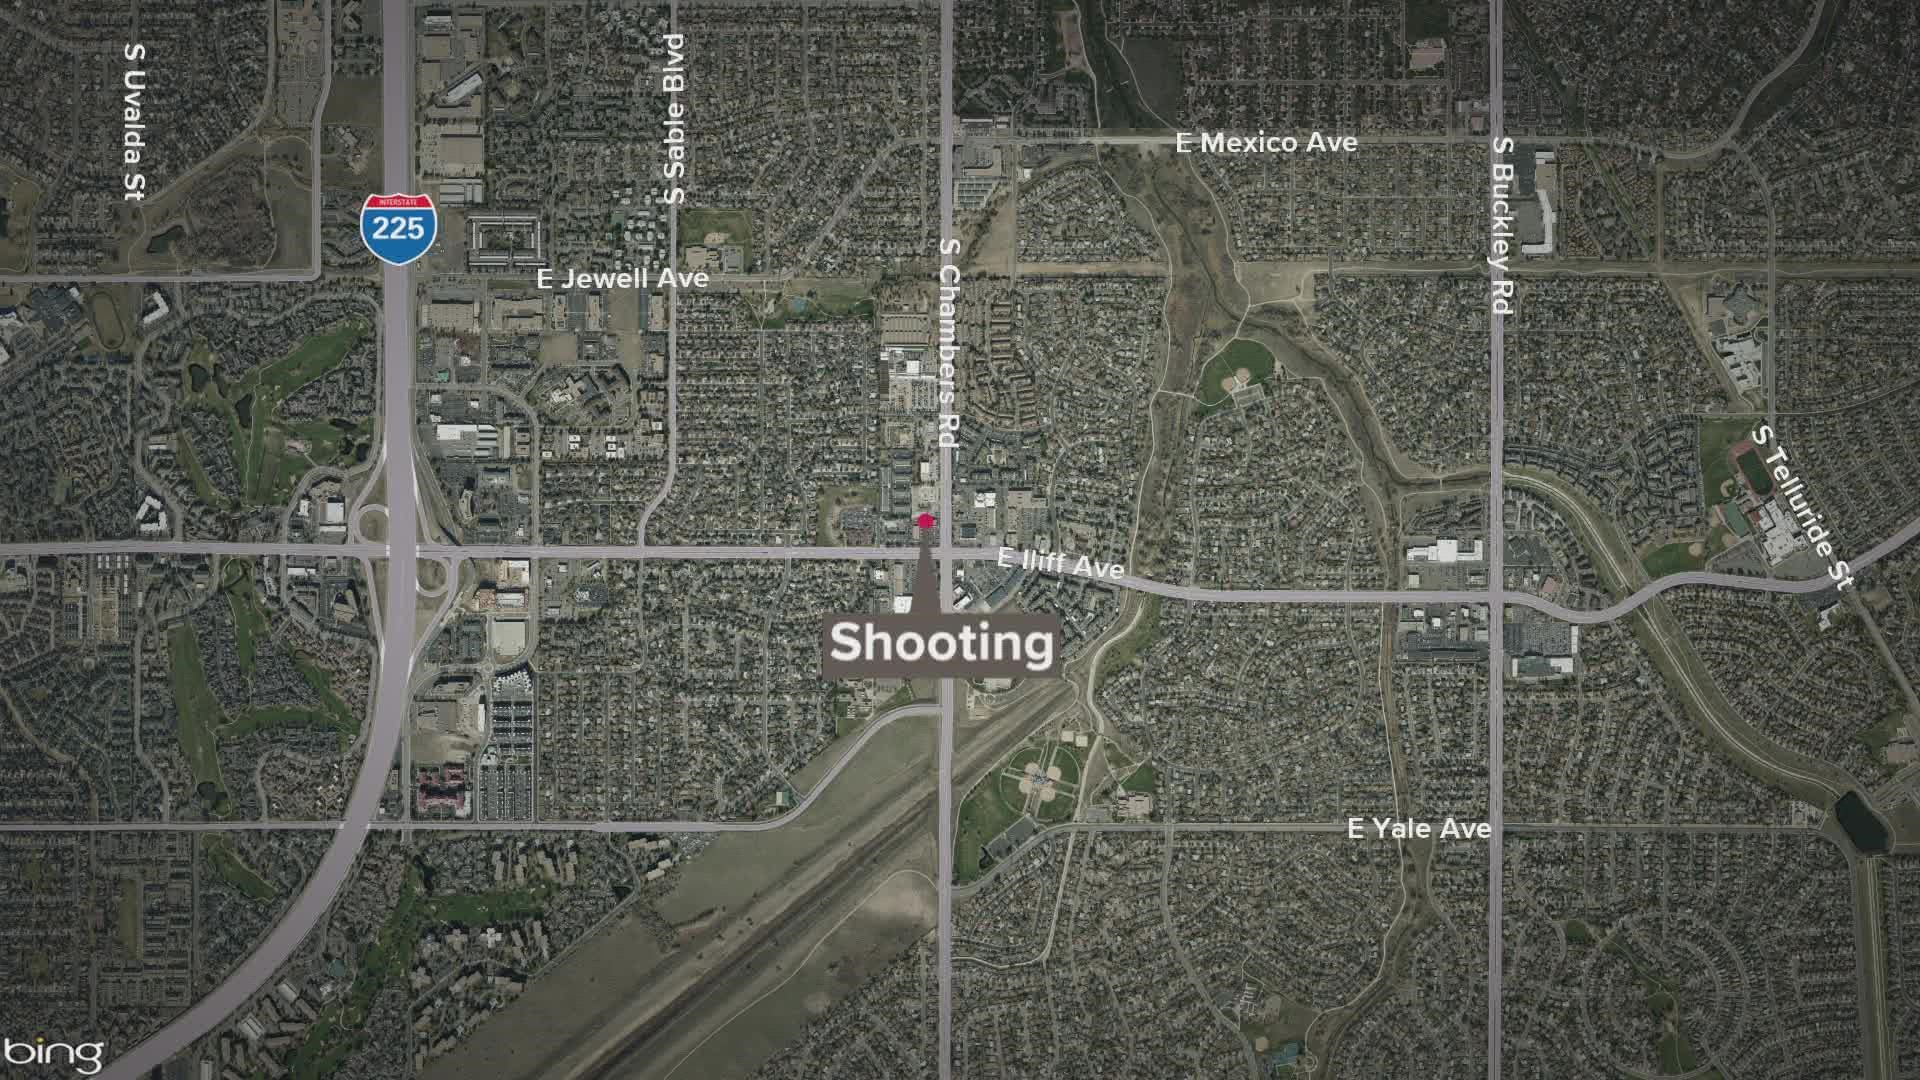 Aurora Police are searching for an unidentified suspect who shot 2 men in a parking lot.